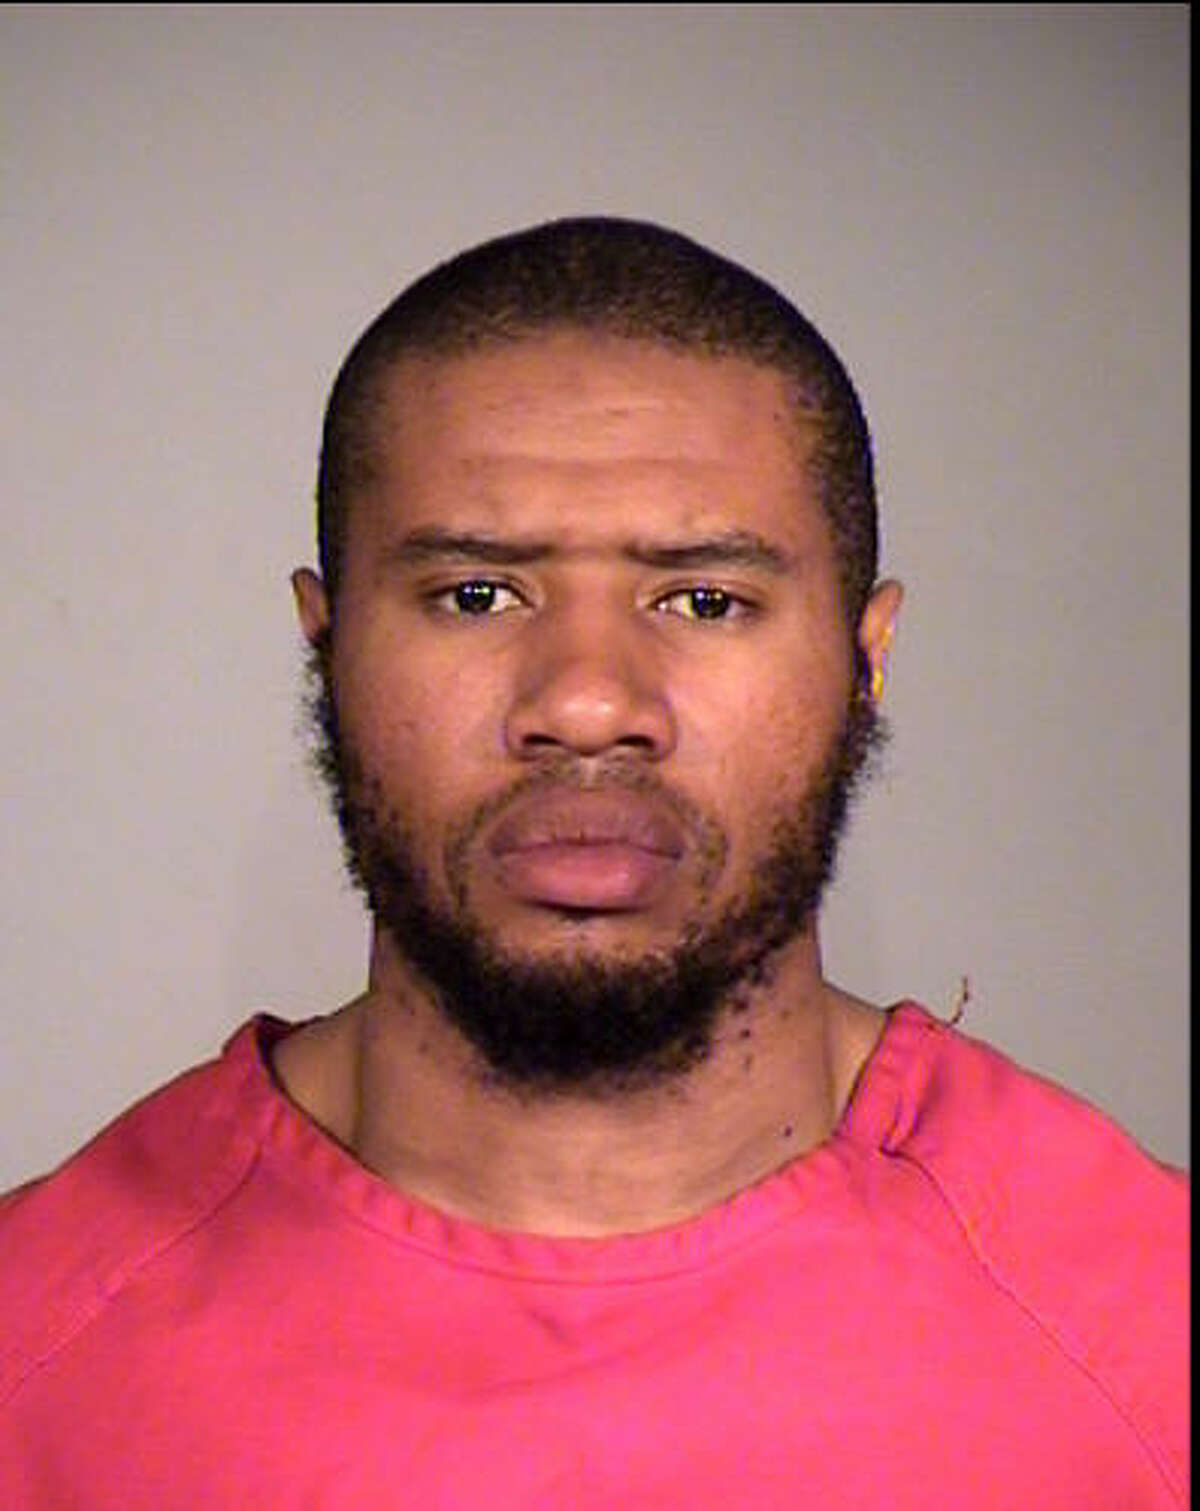 Ali Muhammad Brown, pictured in a photo provided by the Seattle Police Department in 2014.